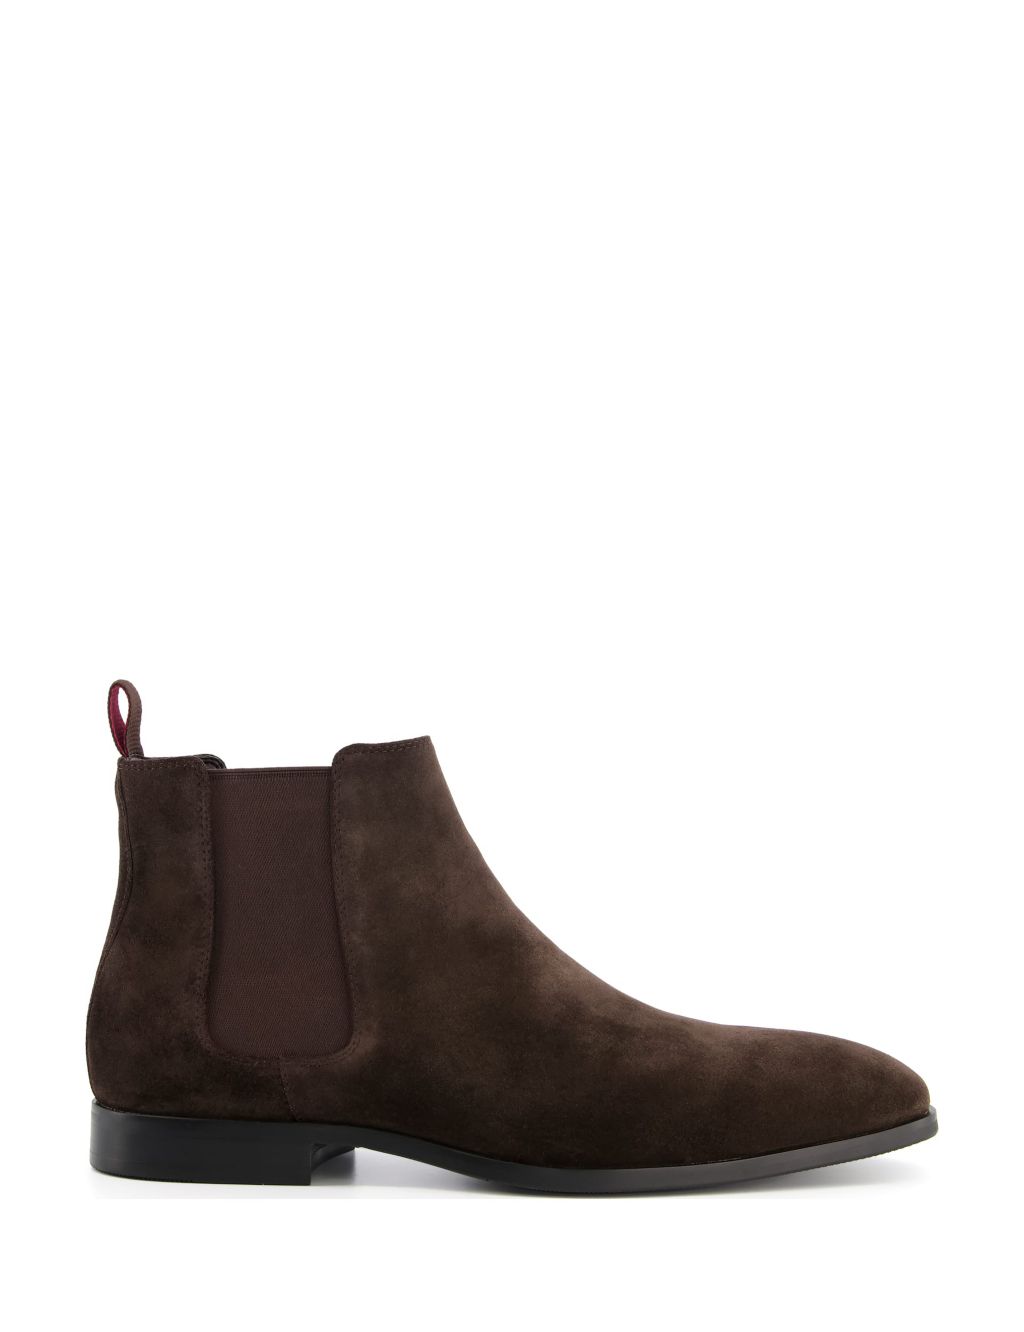 Suede Chelsea Ankle Boots image 1